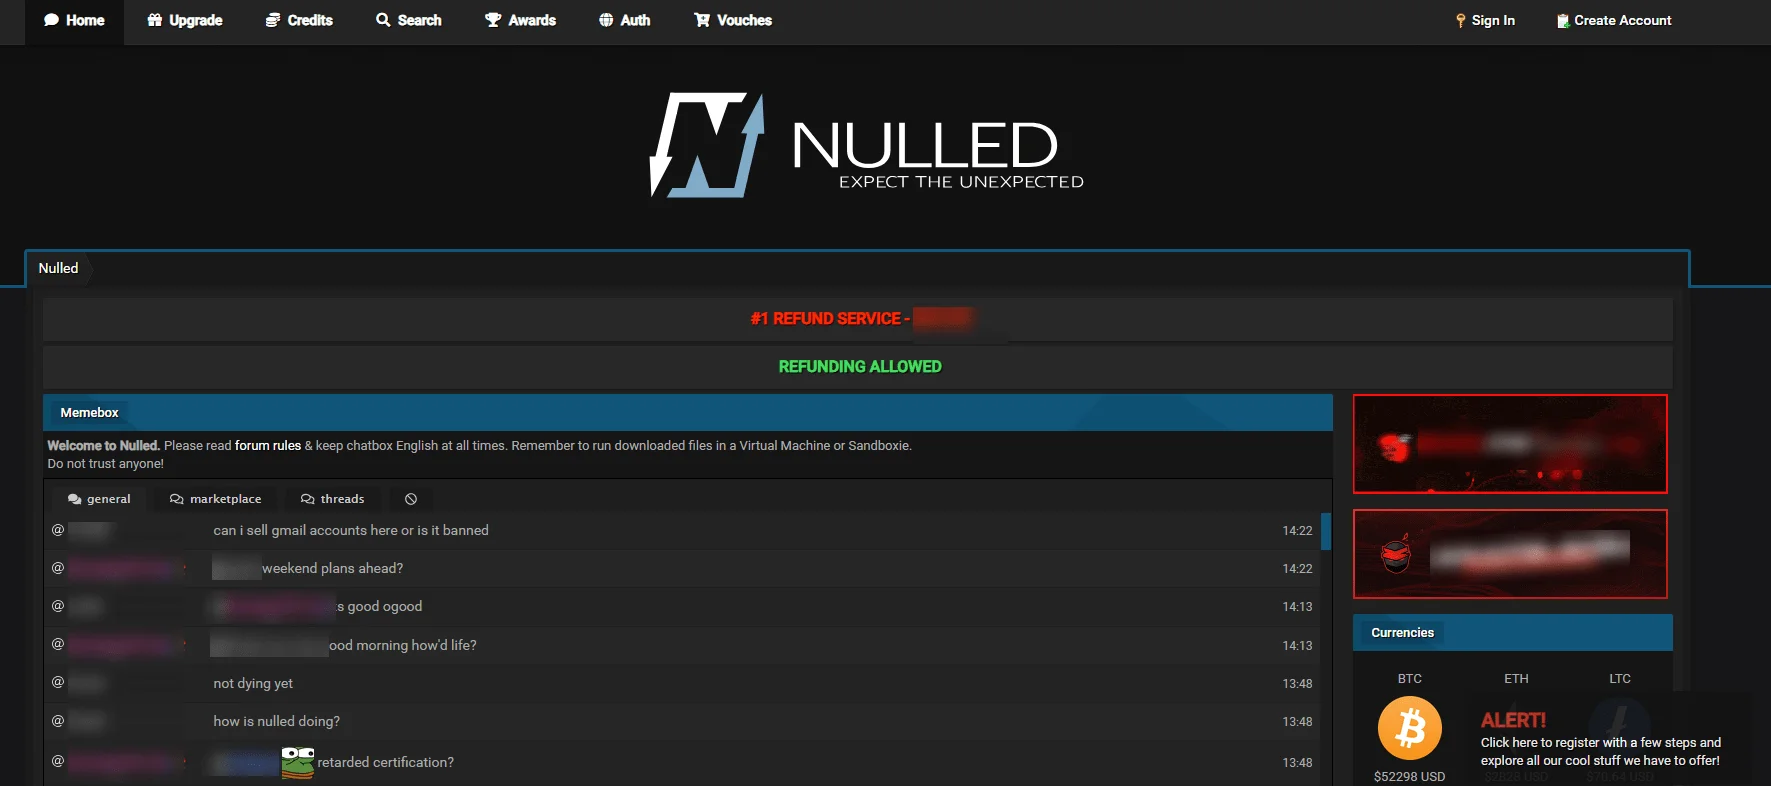 Nulled’s main page